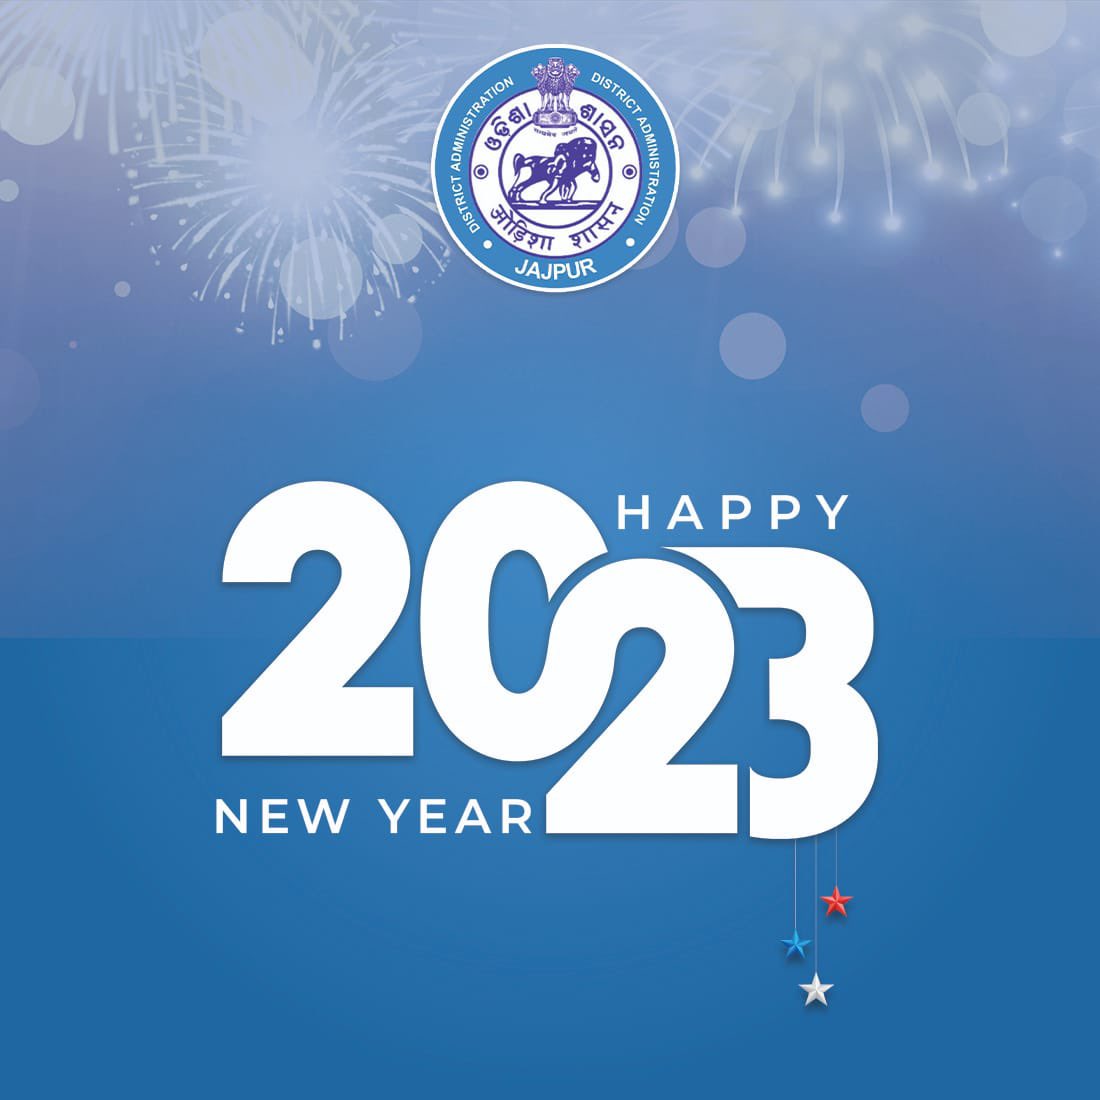 May all your dreams manifest this year. Best wishes of Happy New Year, 2023!